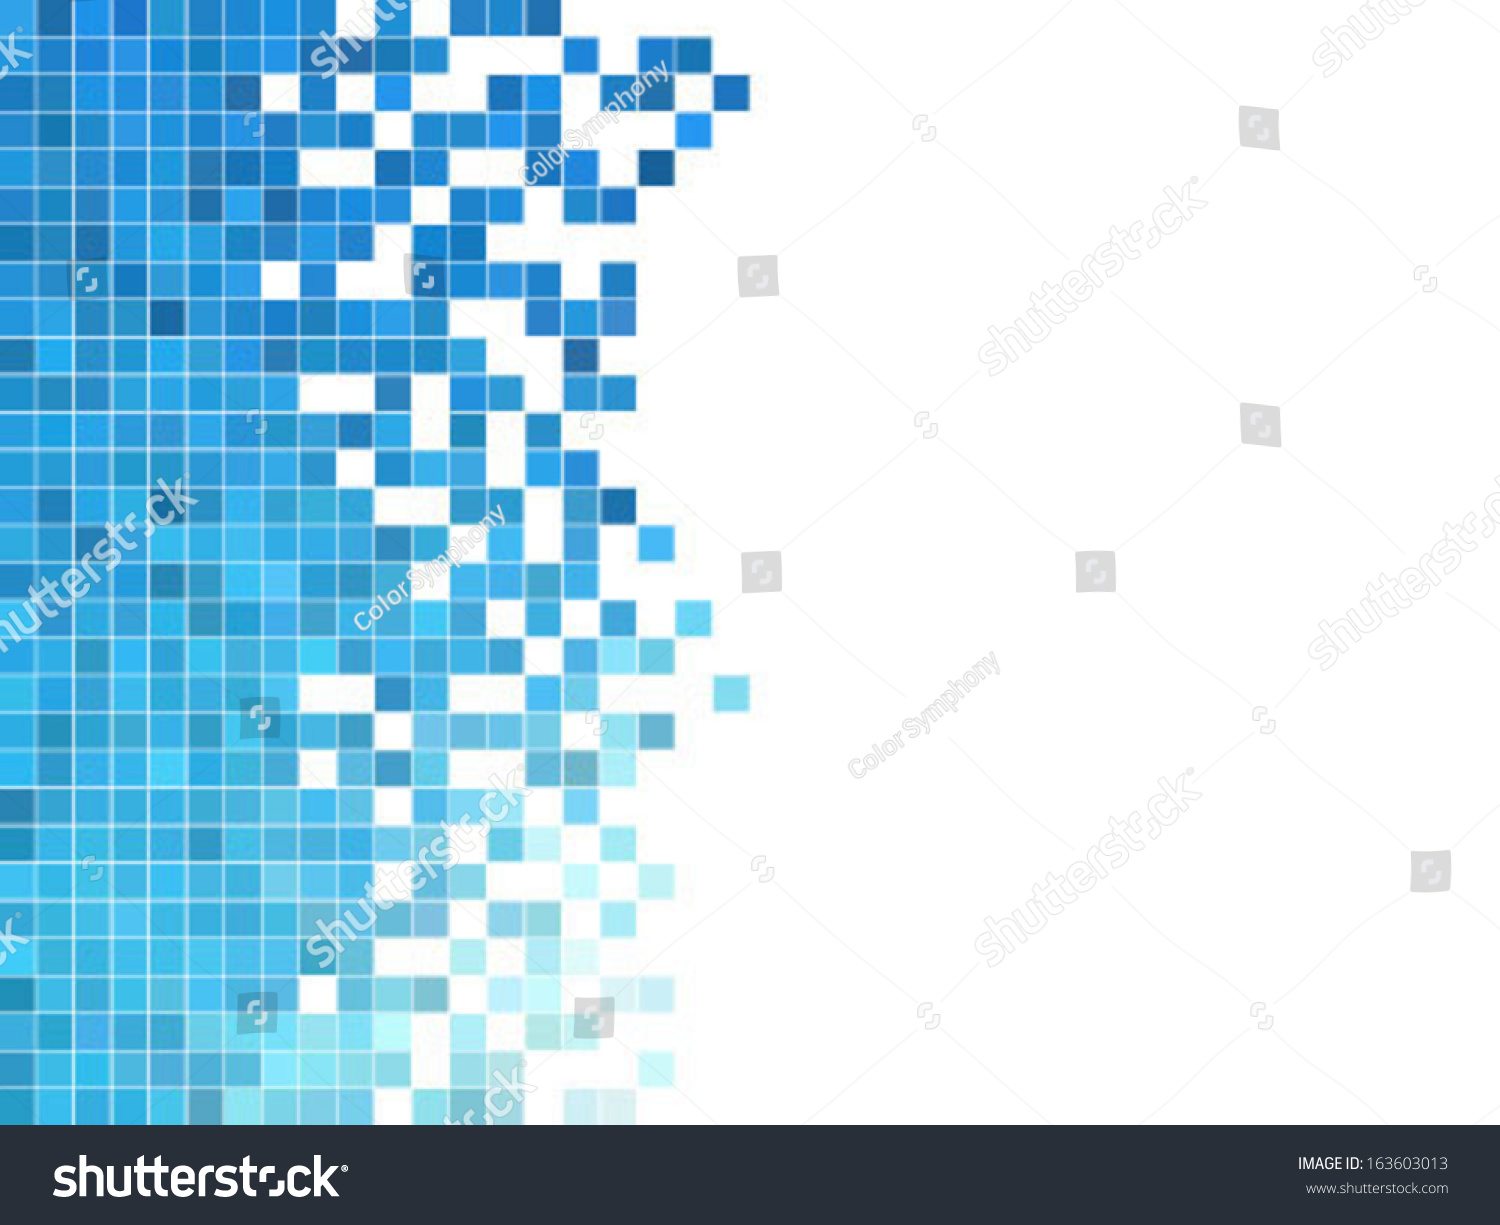 Abstract Square Pixel Mosaic Background Stock Vector 163603013 ...